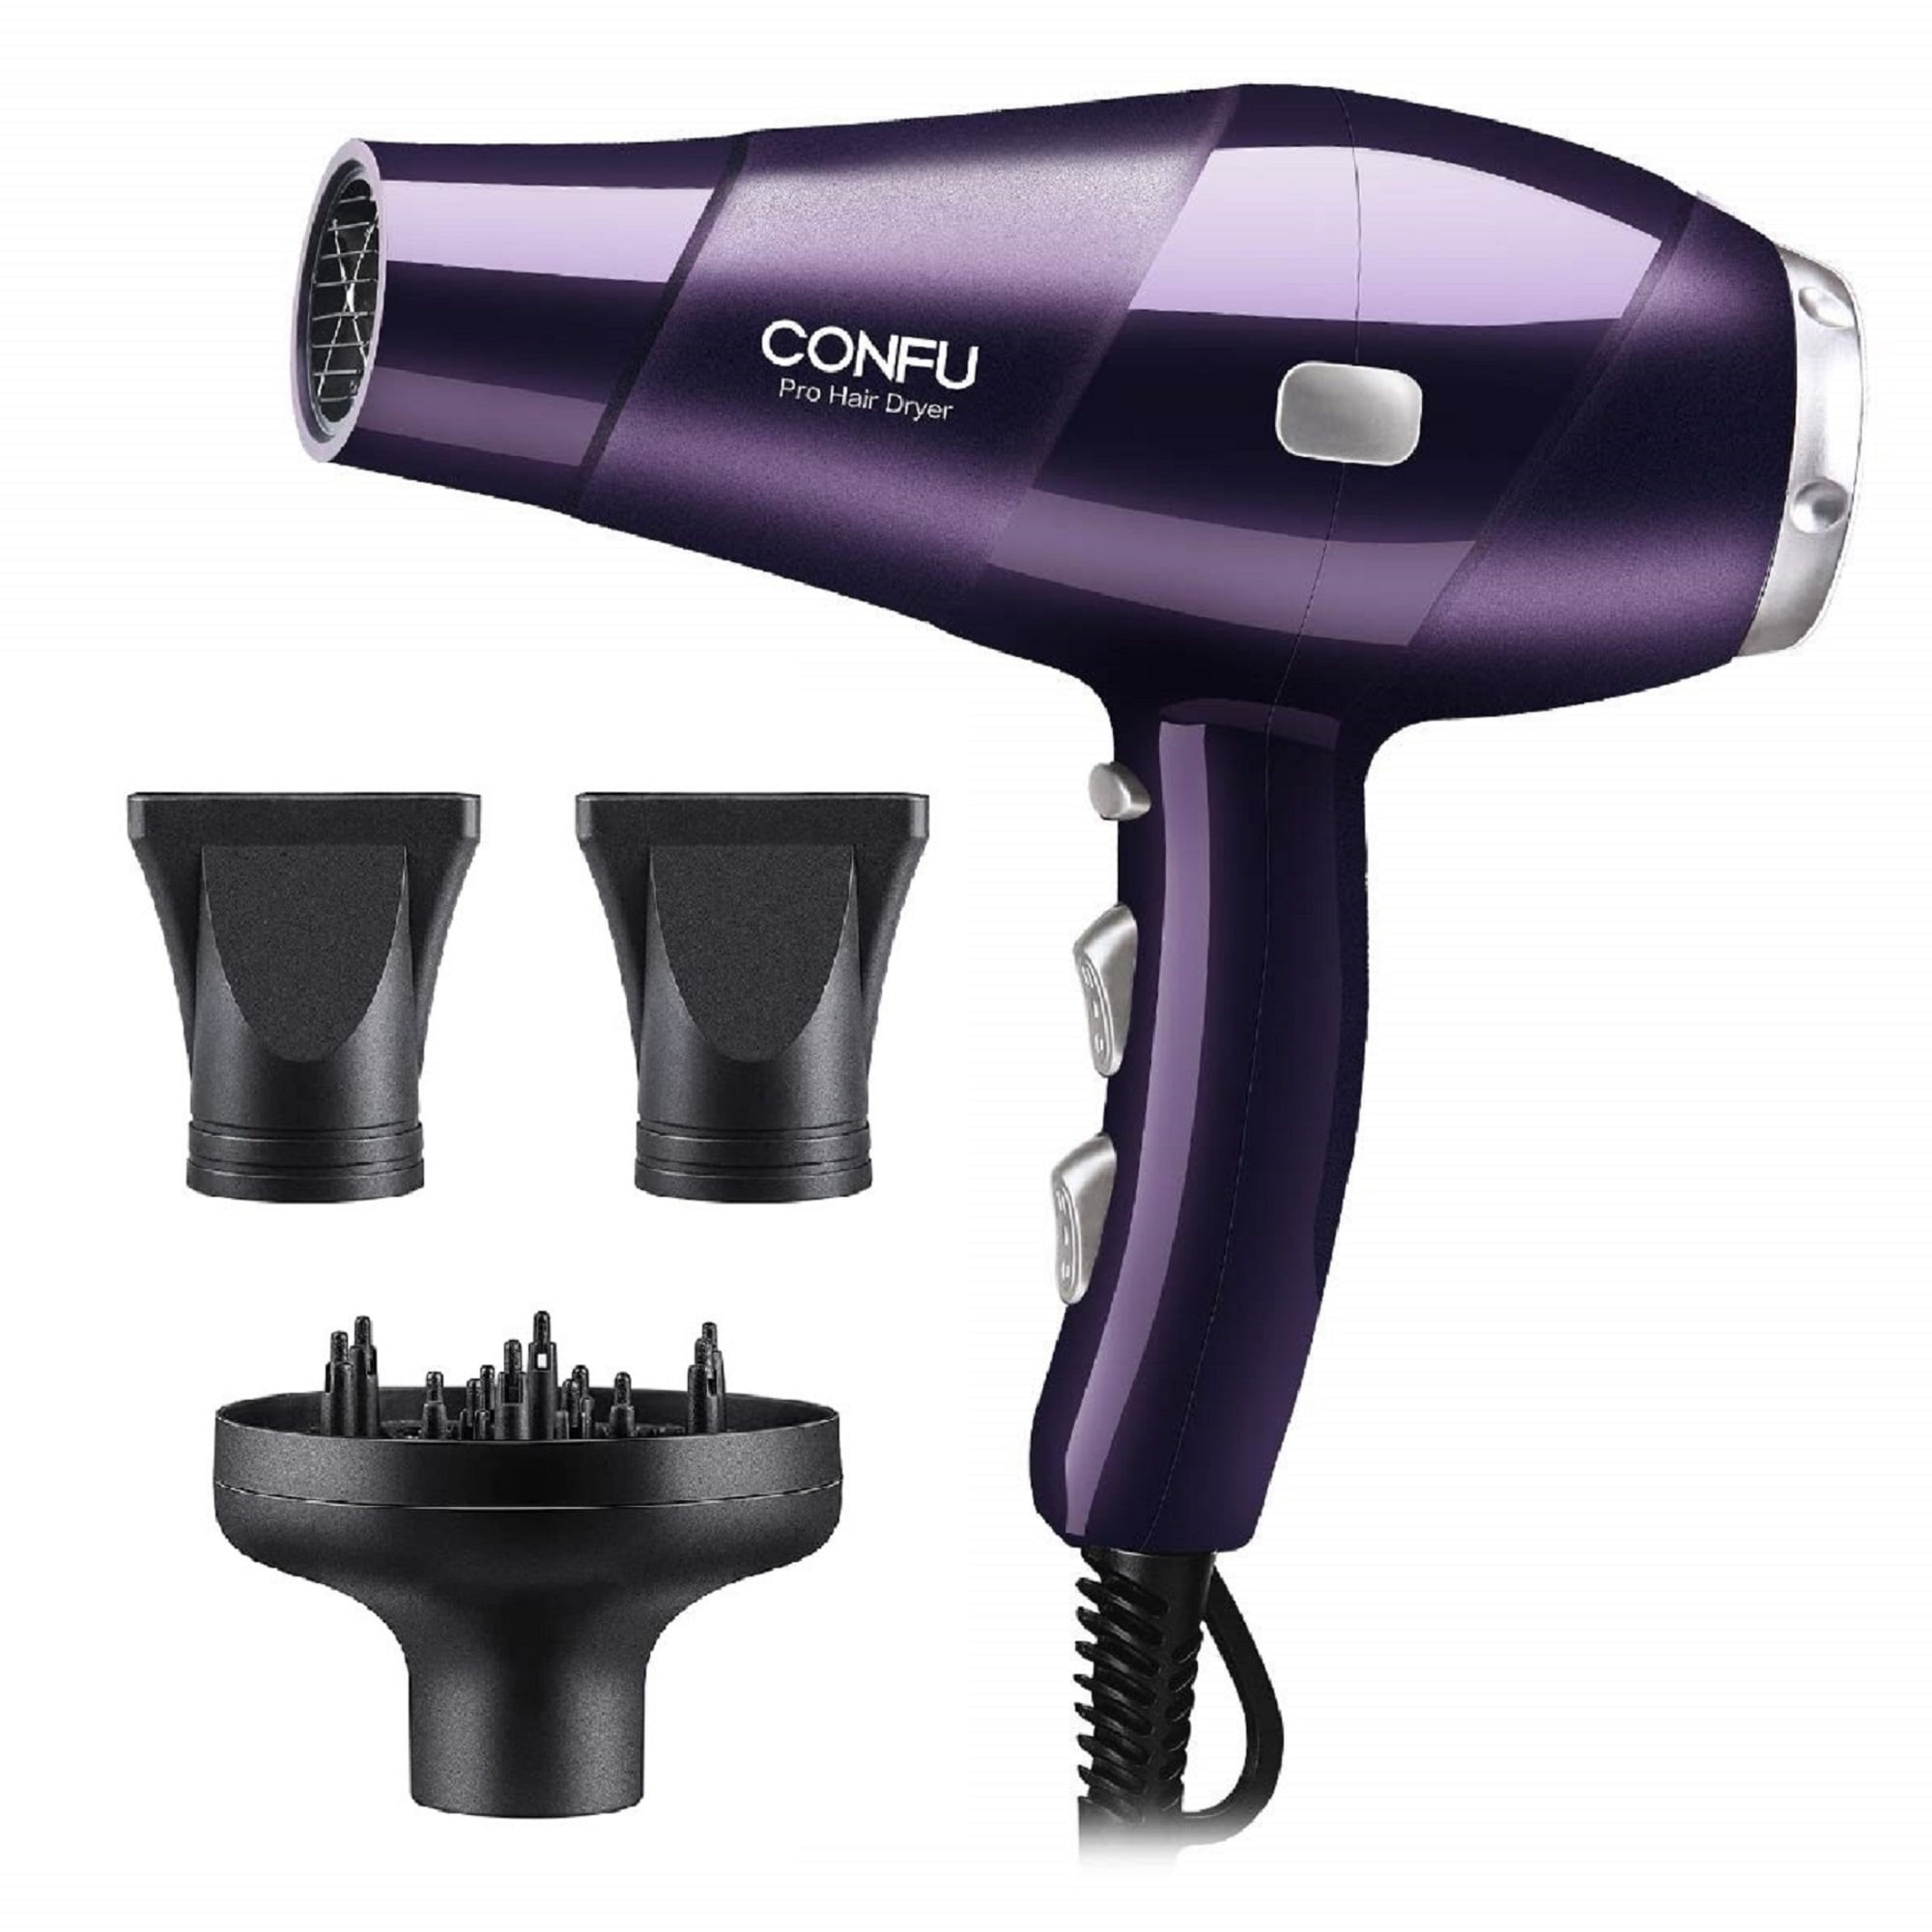 CONFU Professional Hair Dryer, Compact Blow Dryer, Negative Ionic Hair  Dryer with Diffuser and Concentrator, for Quick Drying, ETL Certified,  Purple